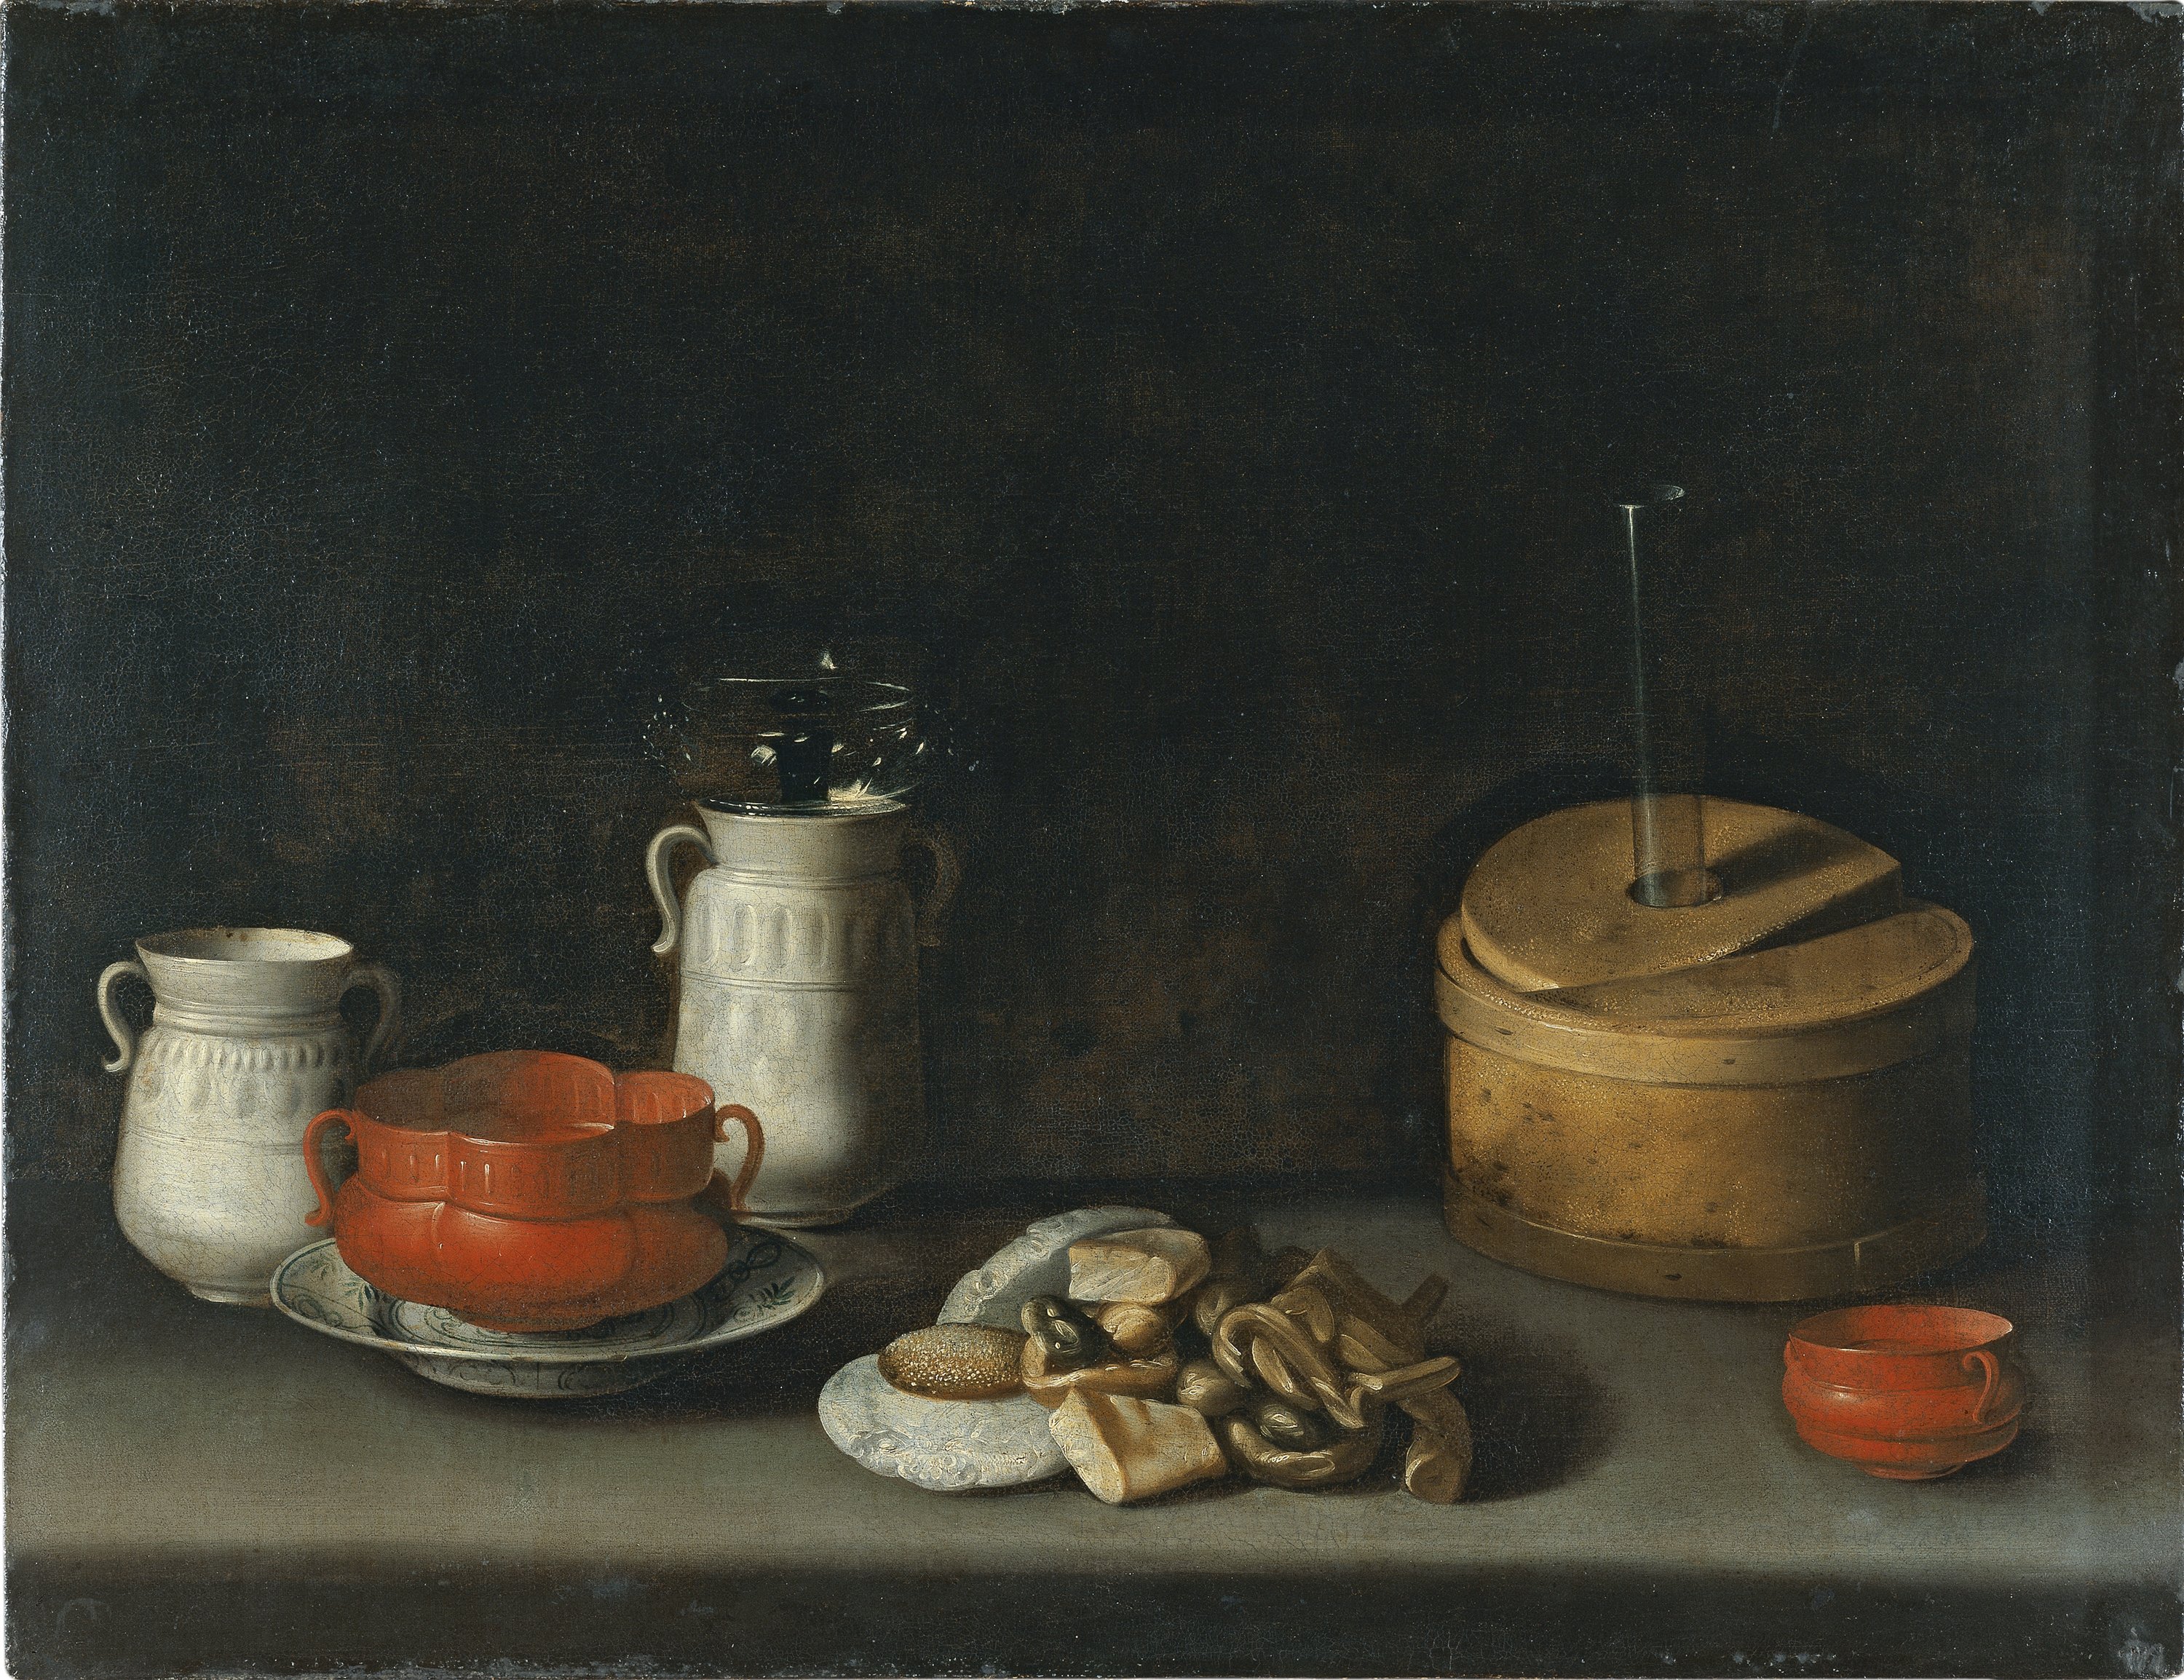 Still Life with Porcelain and Sweets. Bodegón con loza y dulces, c. 1627